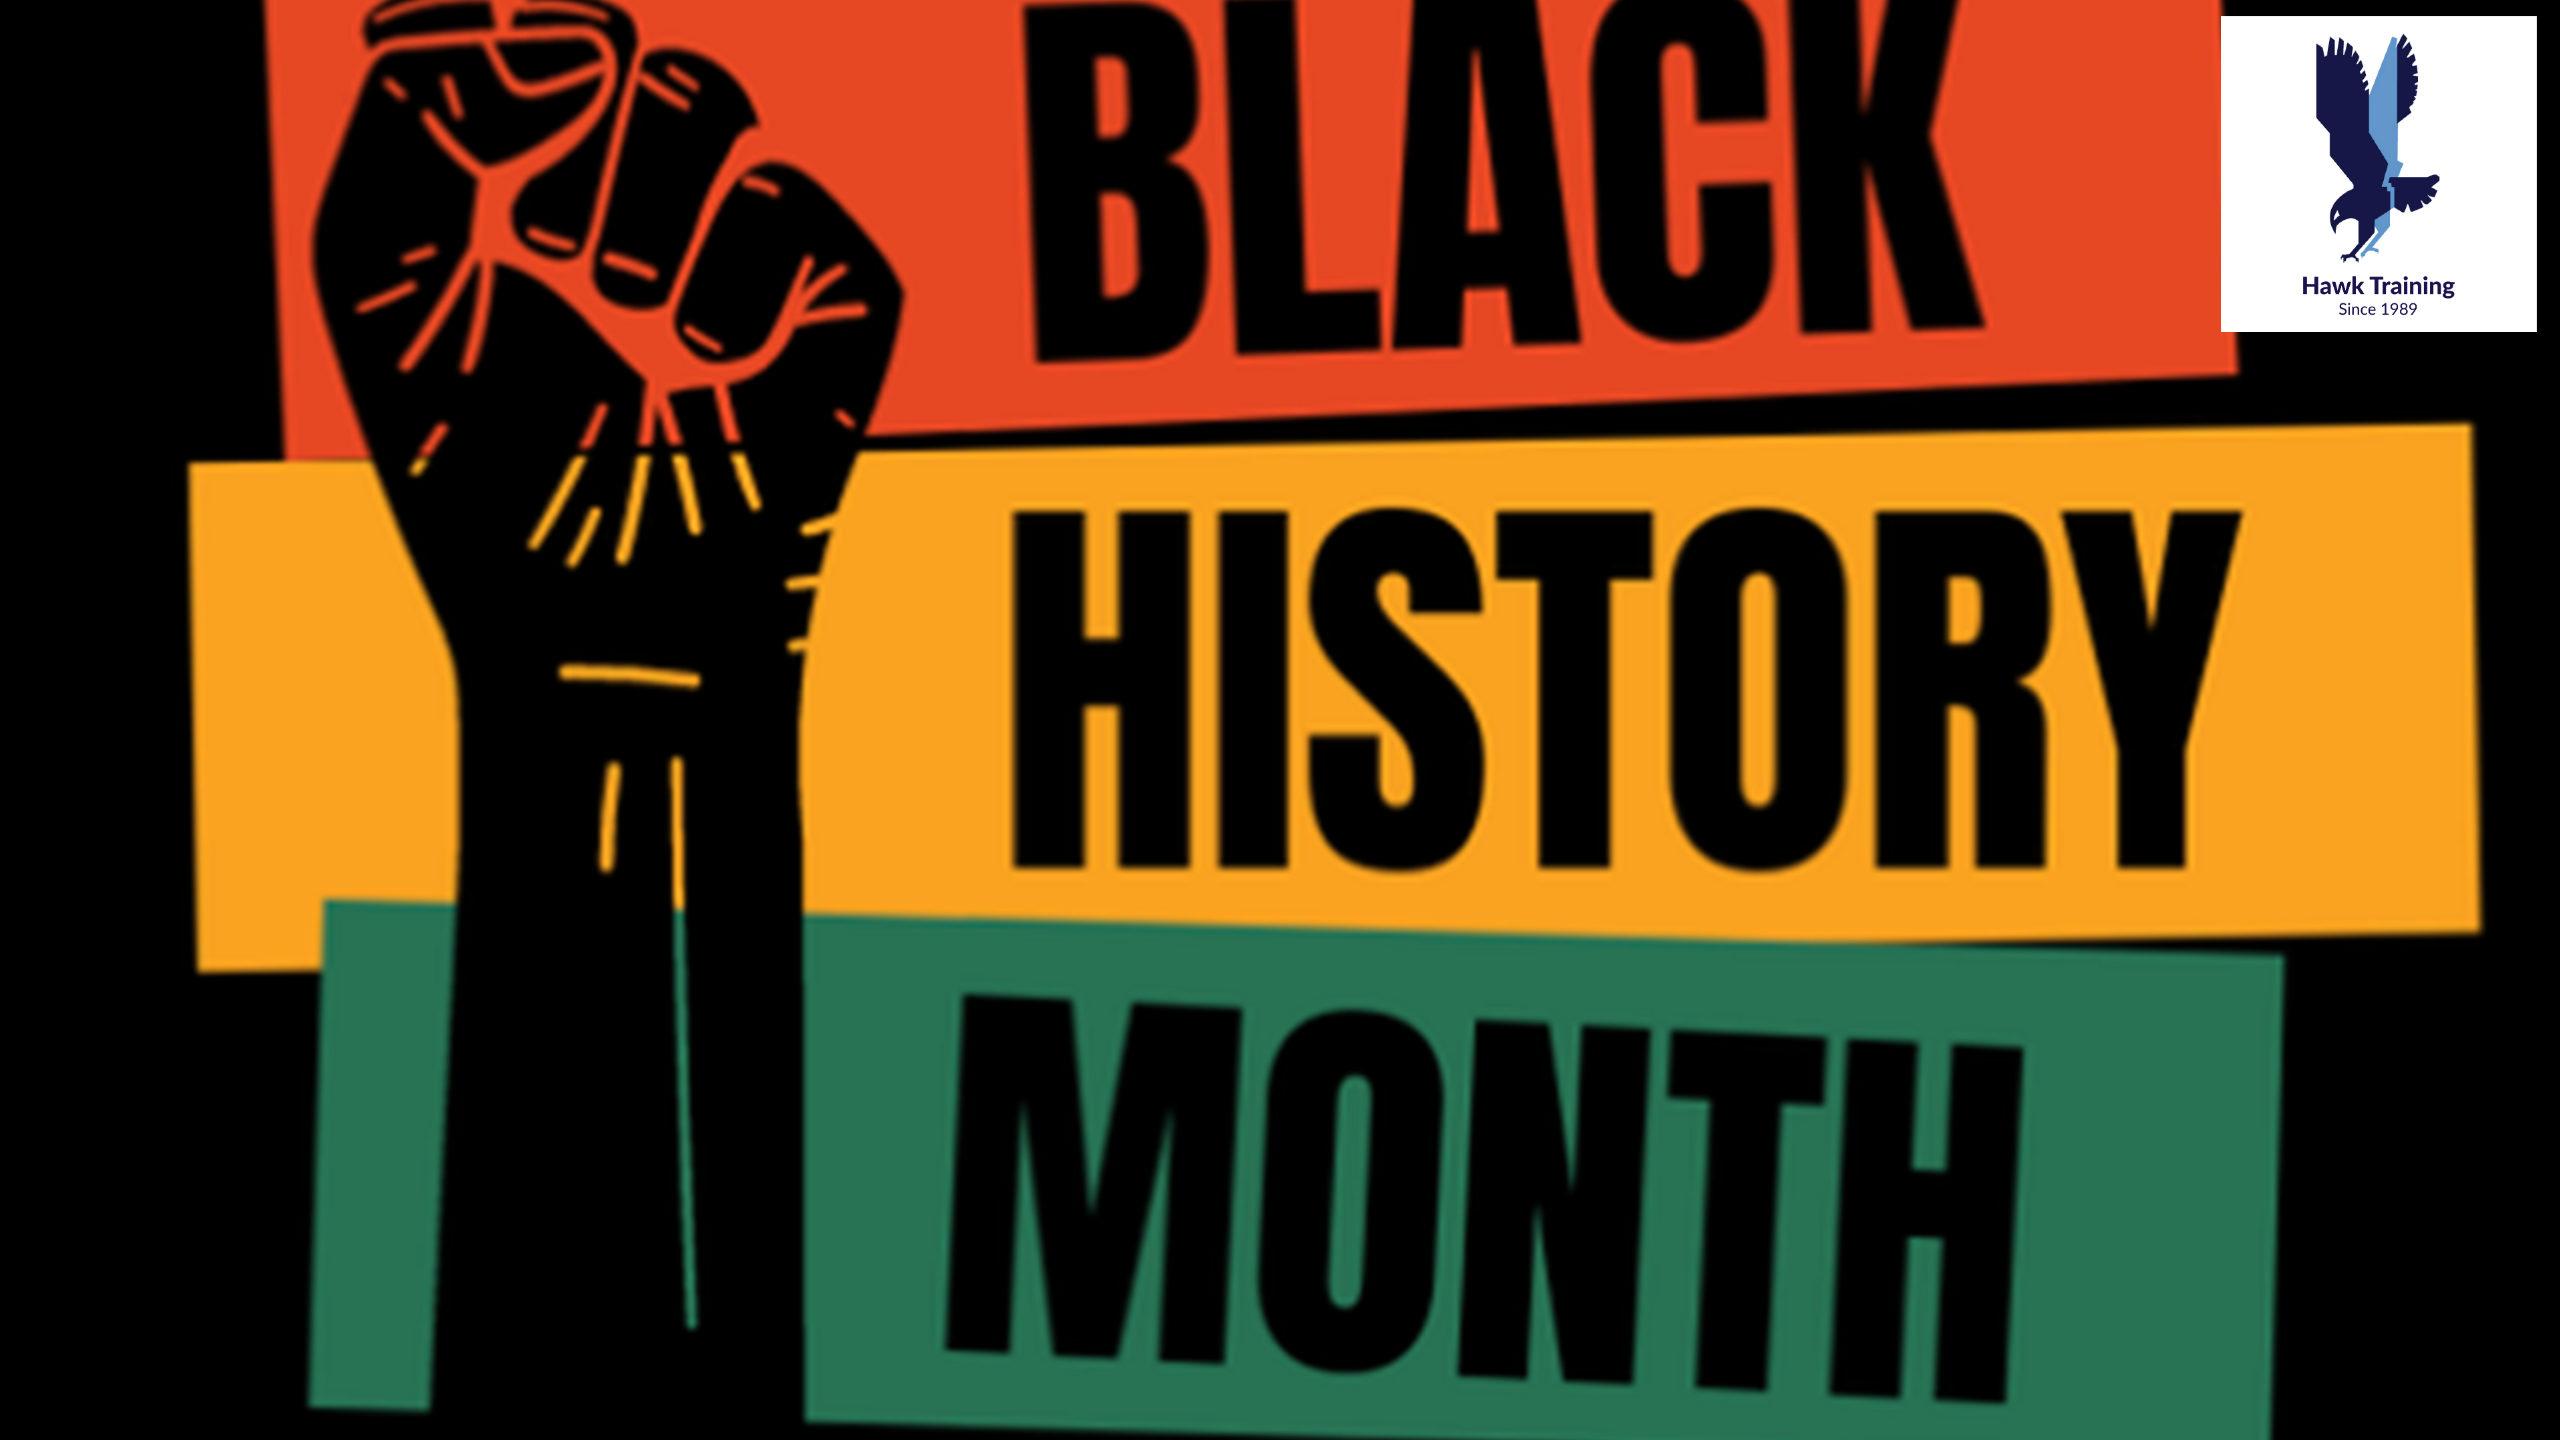 what does black history month mean to me essay